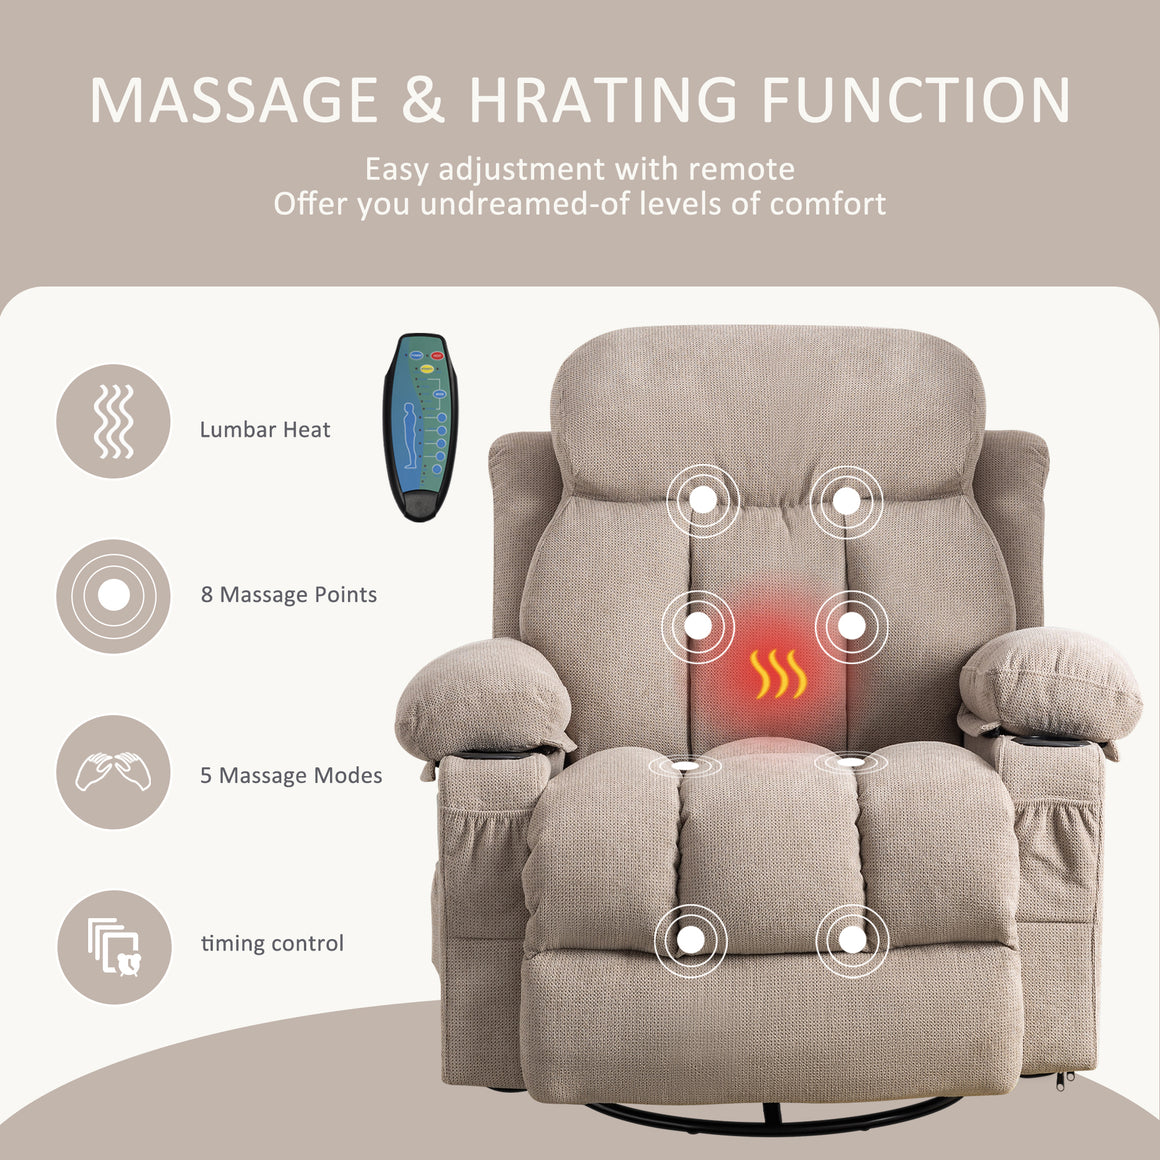 uhomepro Massage Recliner Chair, Electric Heated Power Lift Recliner Chairs  for Adults, Recliner Sofa for Seniors 330 lb Capacity with 5 Vibration